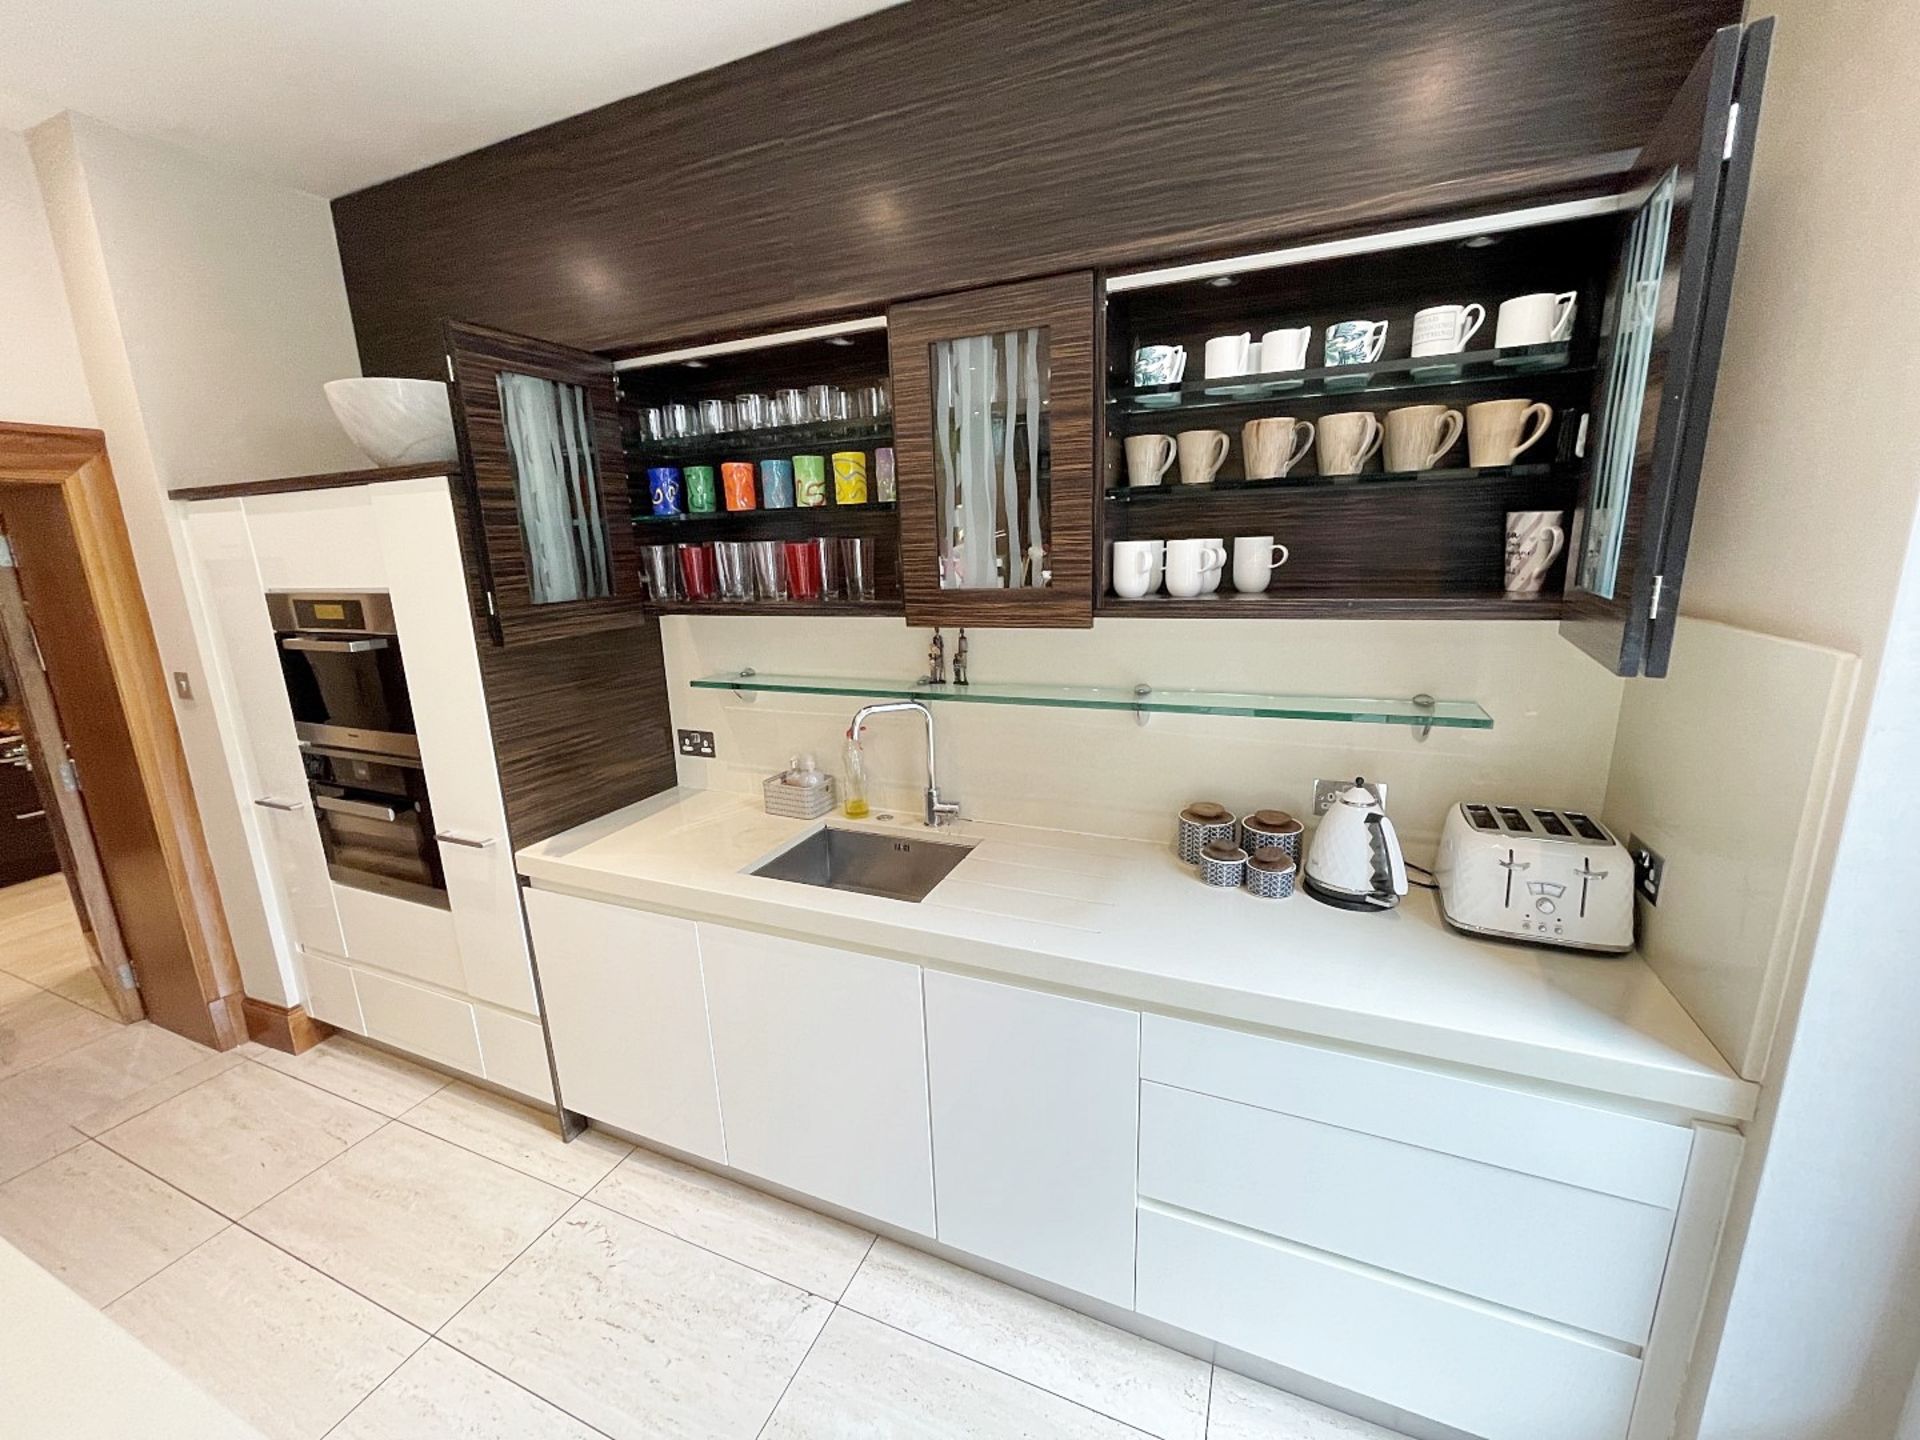 1 x Bespoke Fitted Mowlem & Co Kitchen With Miele, Wolf, and Sub Zero Appliances & Granite Worktops - Image 36 of 131